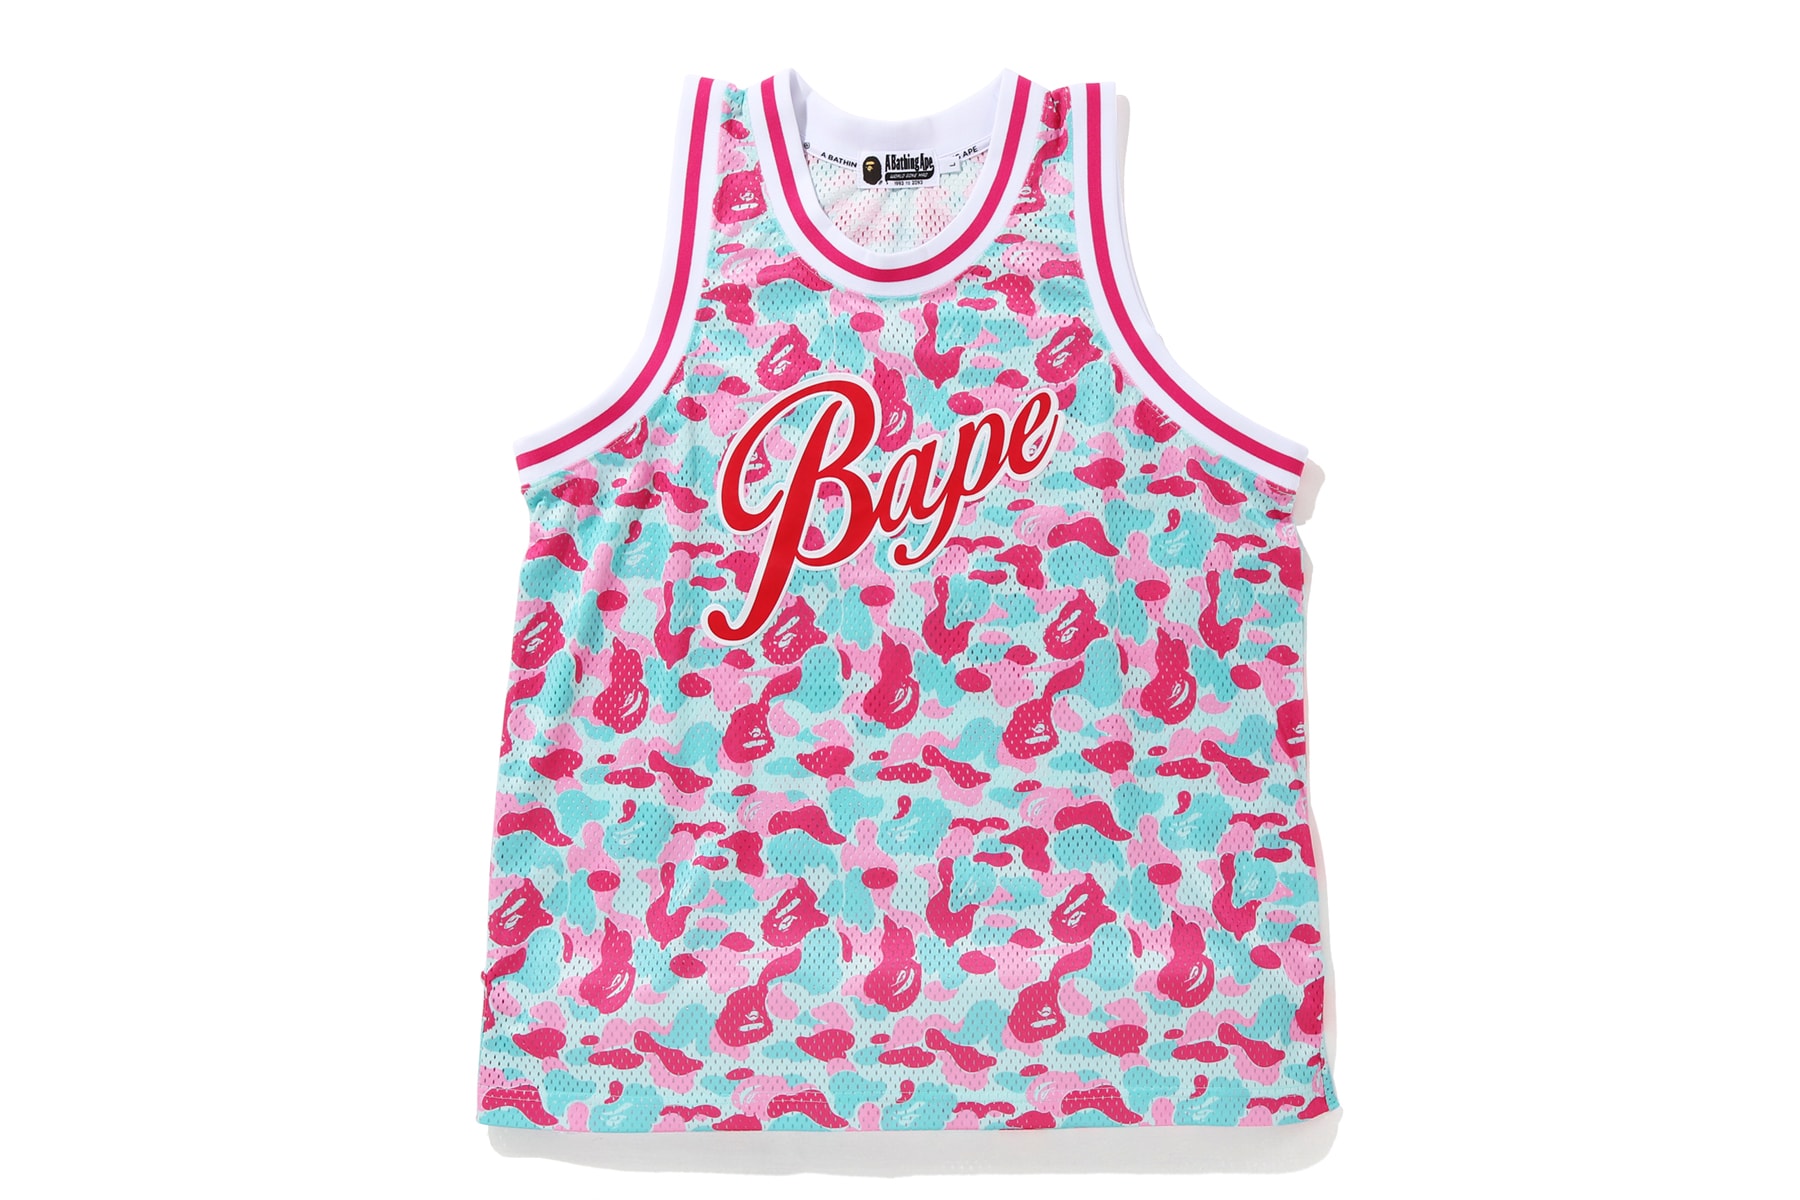 BAPE Exclusive Miami Store Collection a bathing ape lookbooks Miami design district baby milo heat pink blue teal shark hoodies bags accessories stickers iphone cases